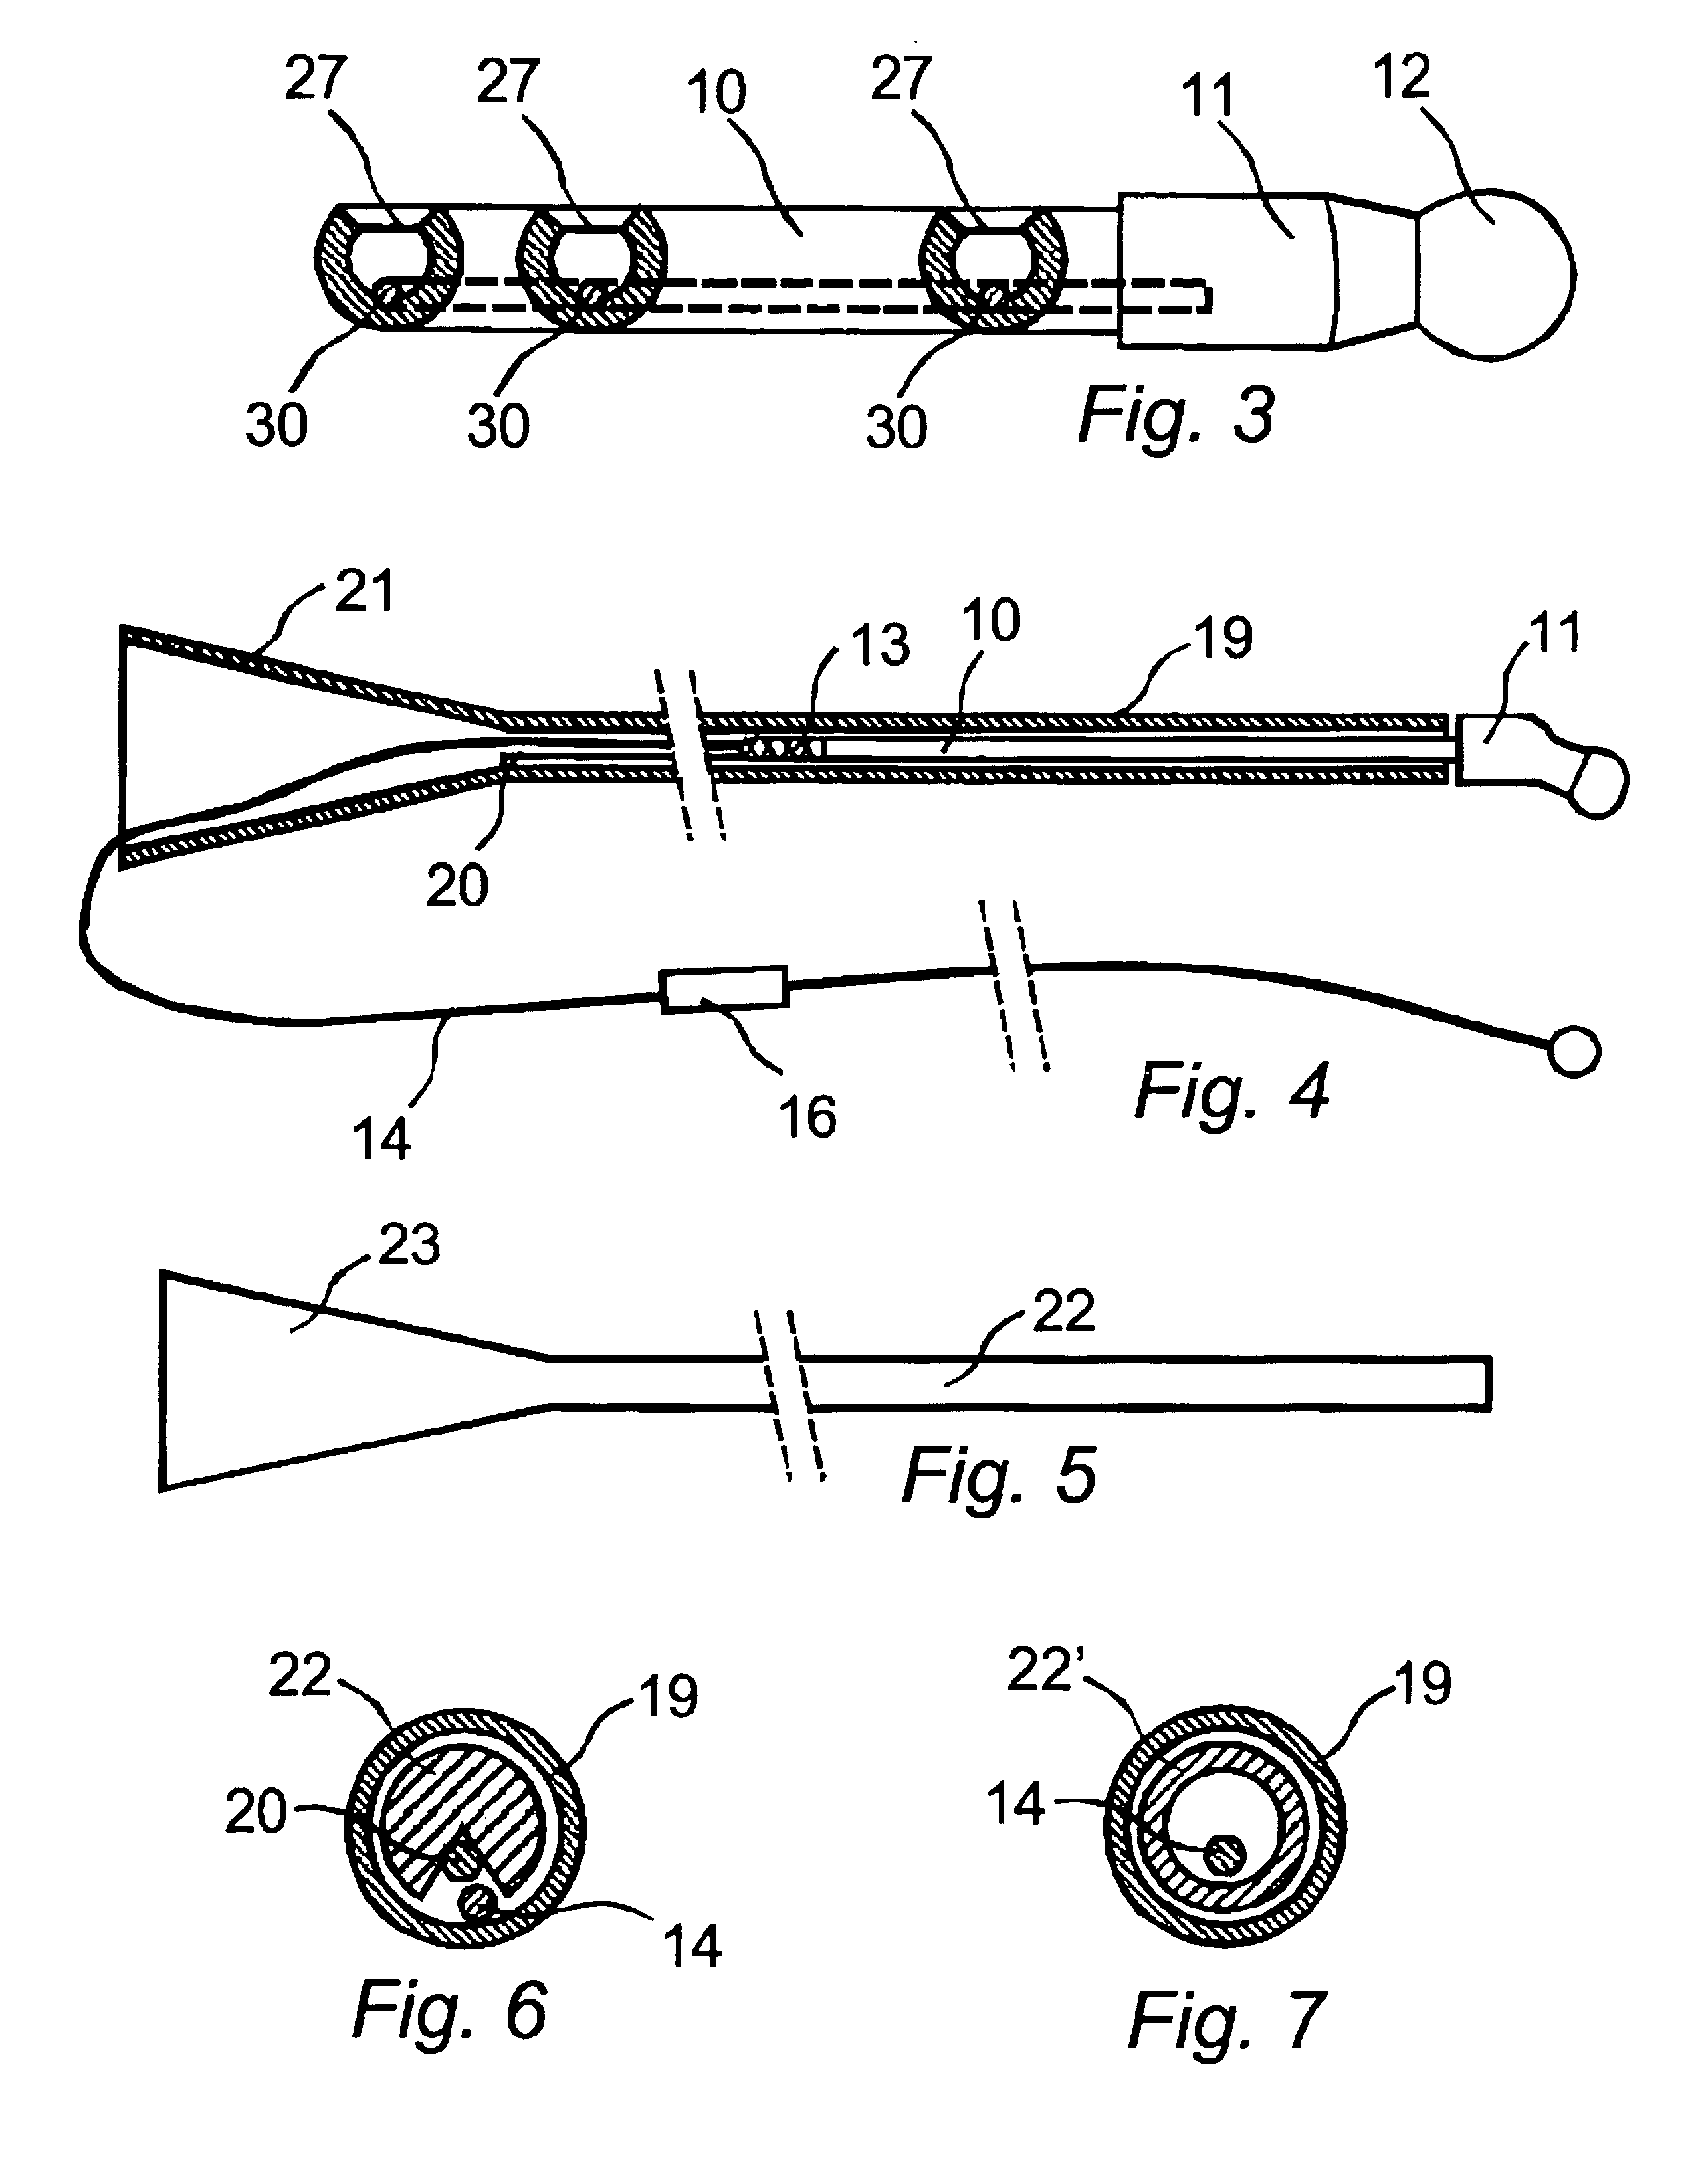 Method and apparatus for insertion of self-draining urine apparatus into bladder